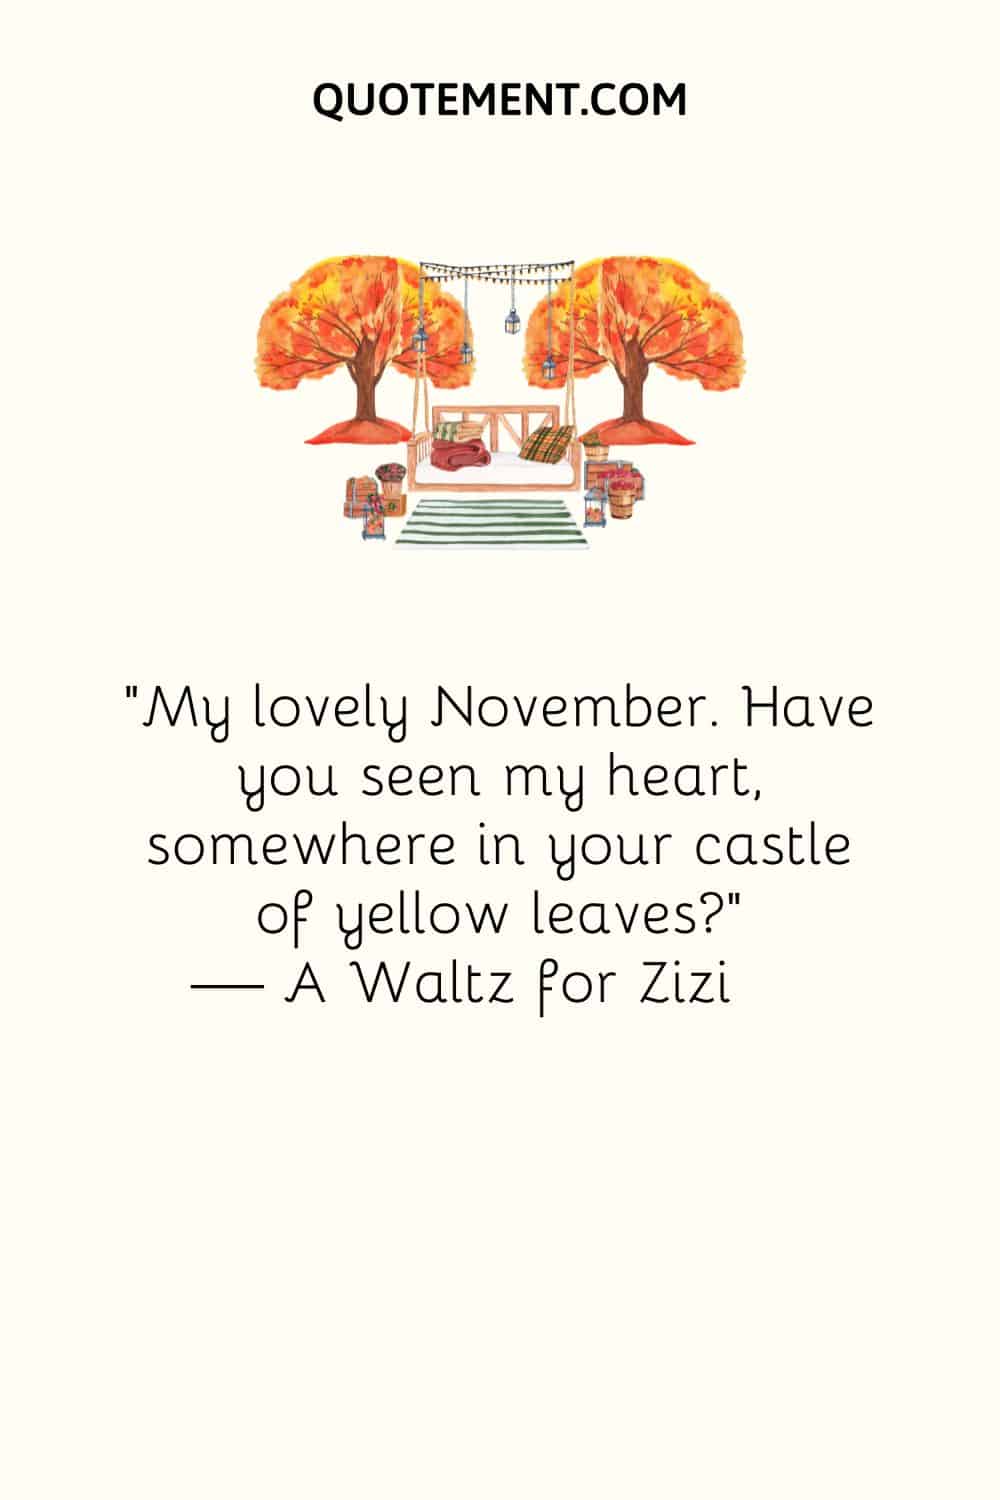 trees with golden leaves illustration representing november quote